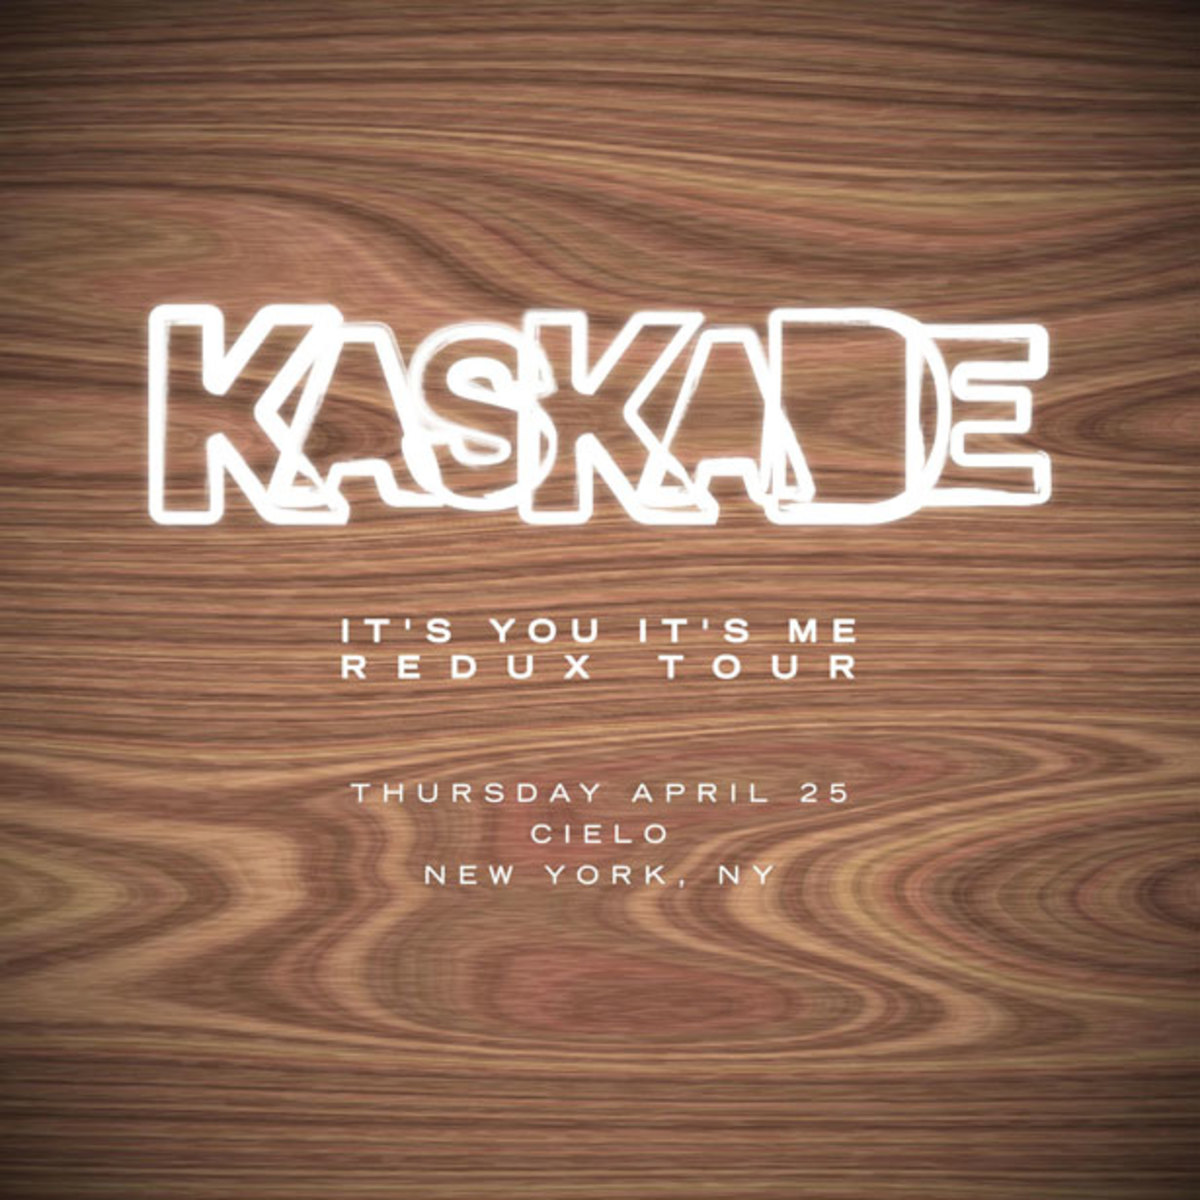 Kaskade's "It's You, It's Me" Redux Tour to invade NYC's Cielo? Most Definitely.